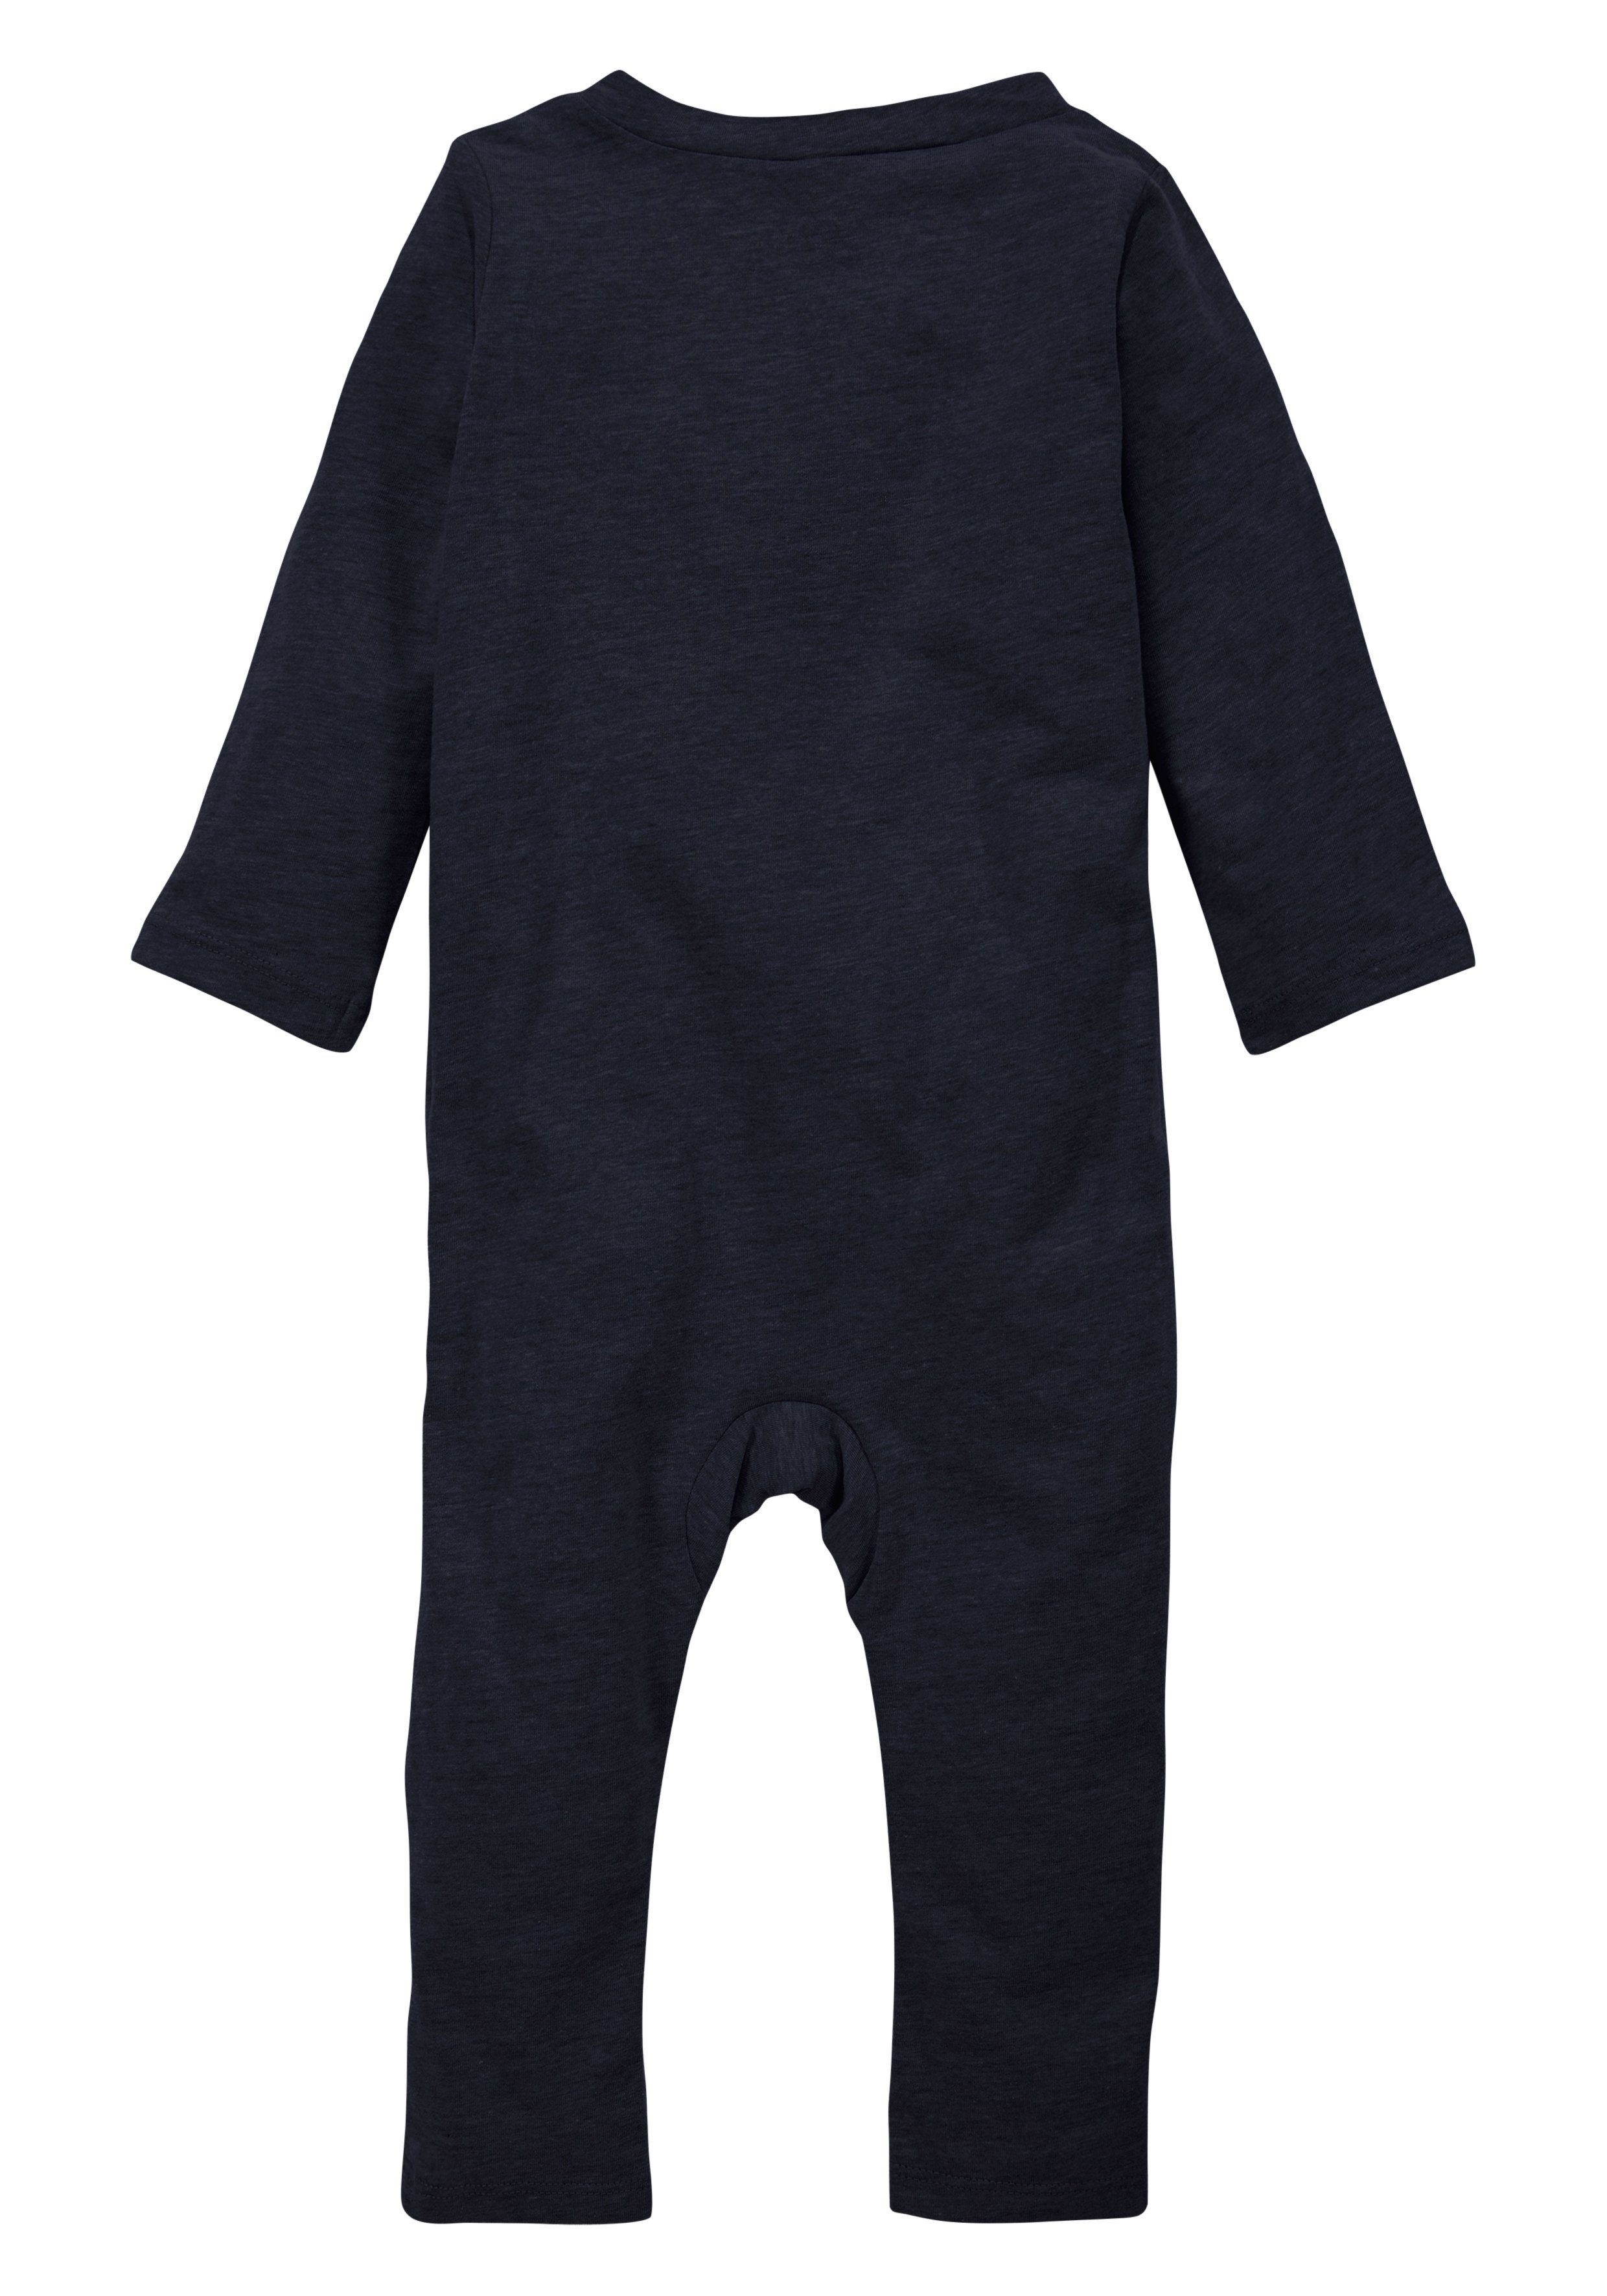 COVERALL HBR NON-FOOTED Strampler Nike Sportswear obsidian